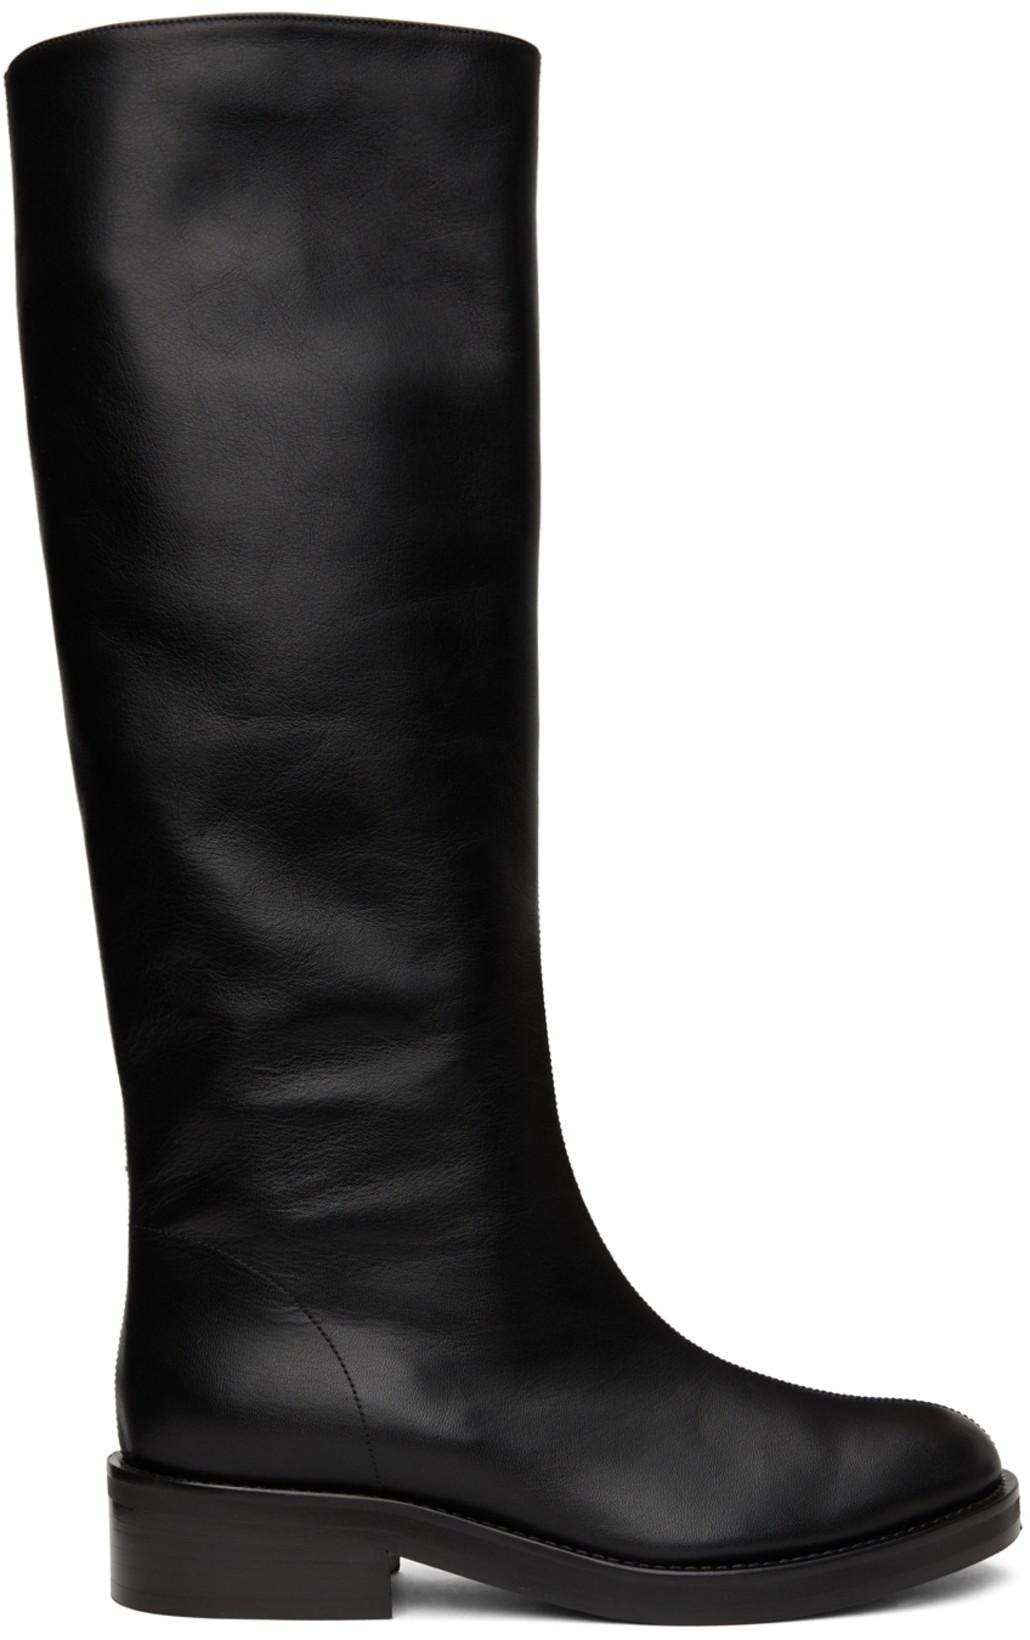 Black Riding Boots by CO